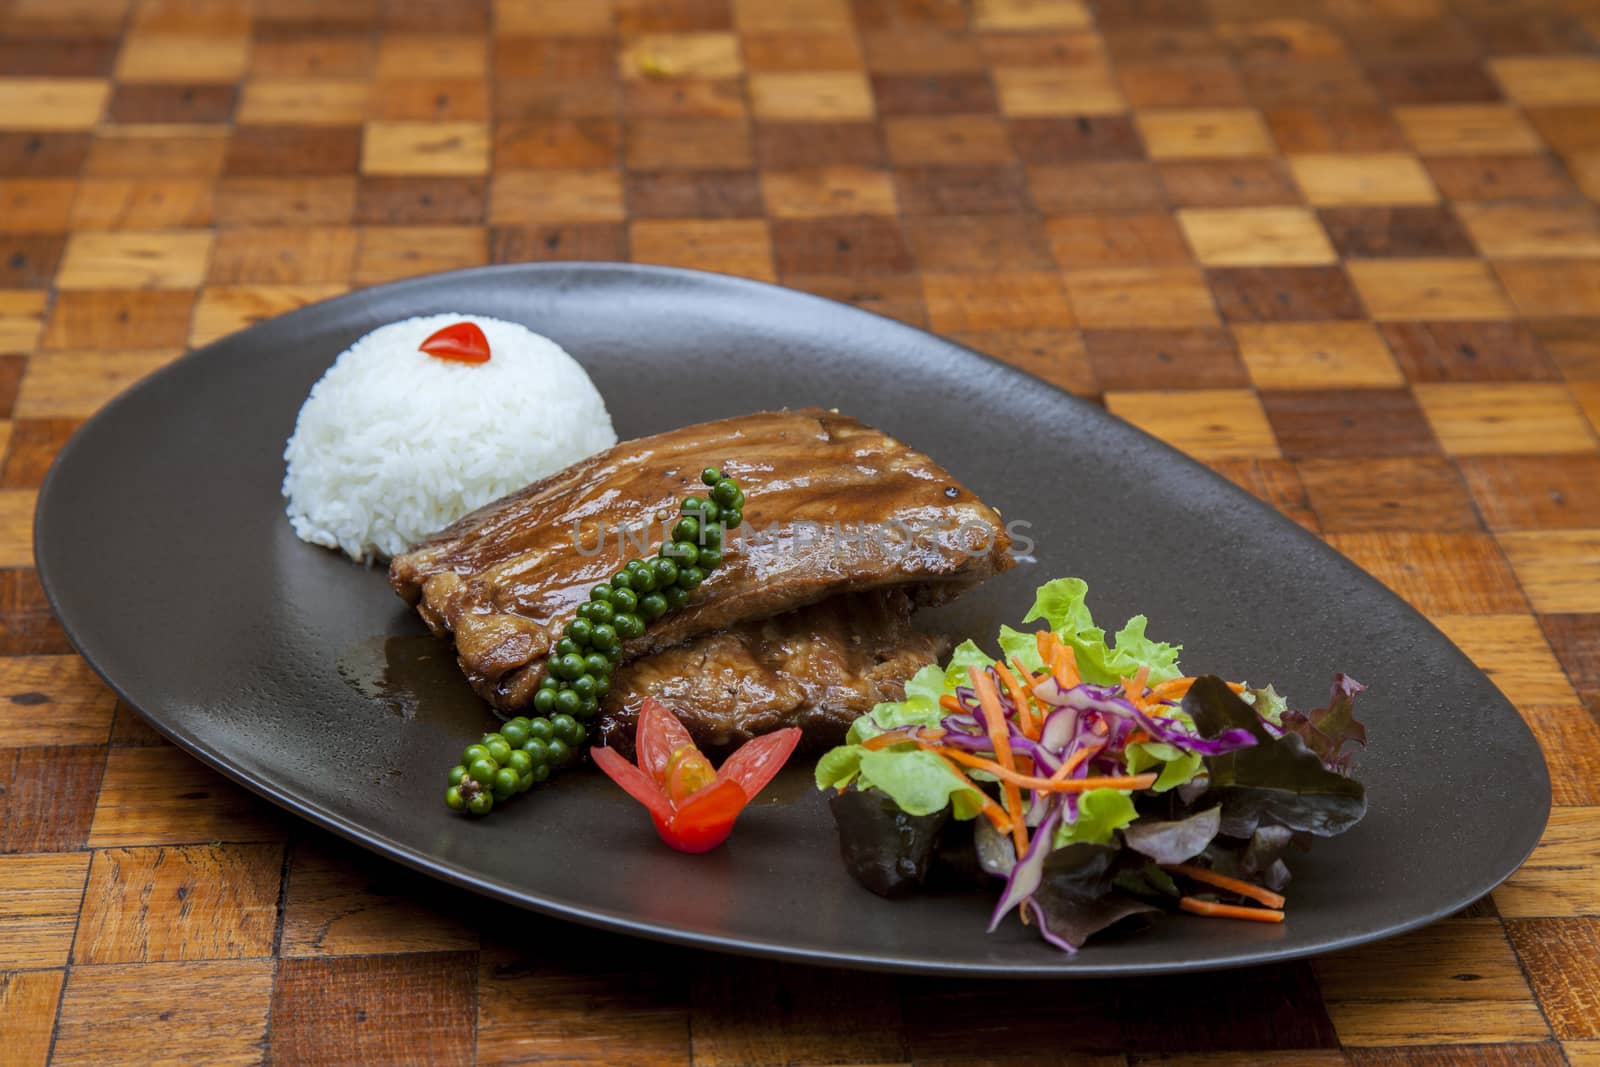 Roast pork ribs with honey, quick menu,There is a beautiful salad of vegetables.